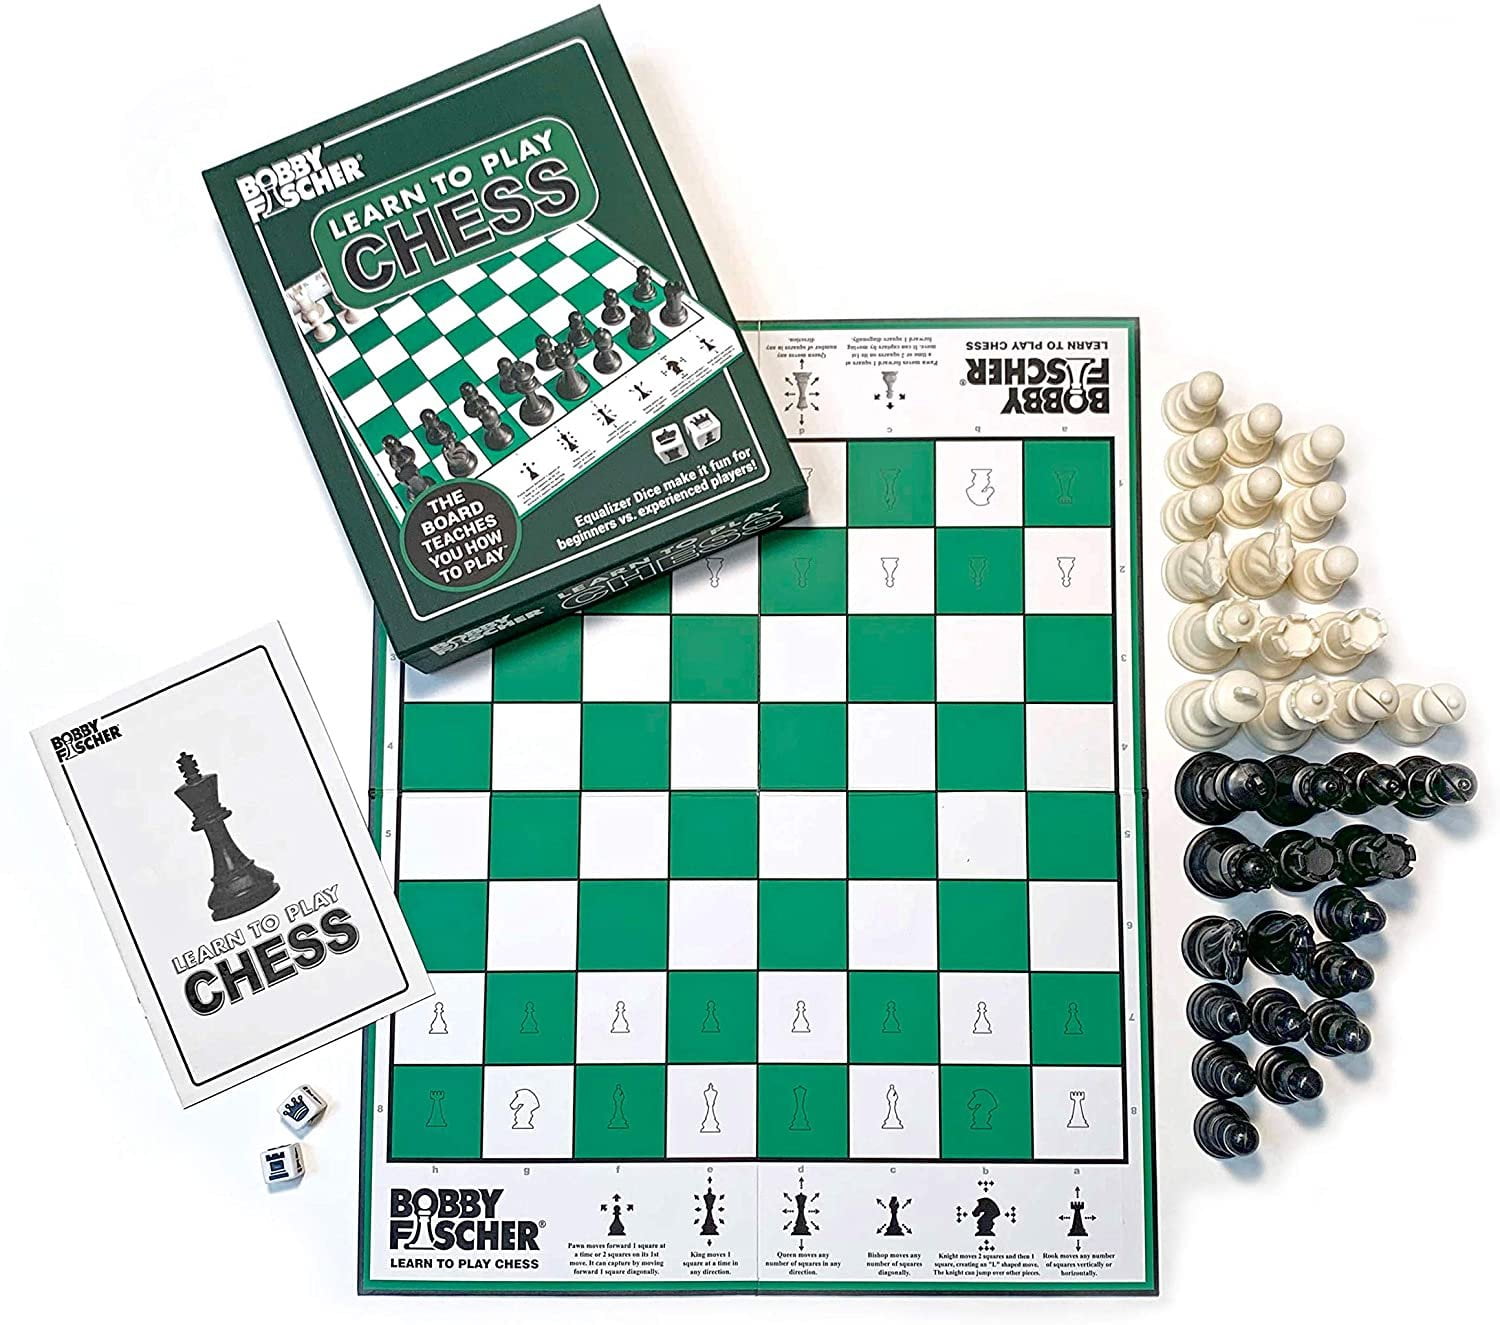 FREE US SHIP! NEW IN SHRINK WRAP DGT 3000 Digital Chess and Scrabble Clock 